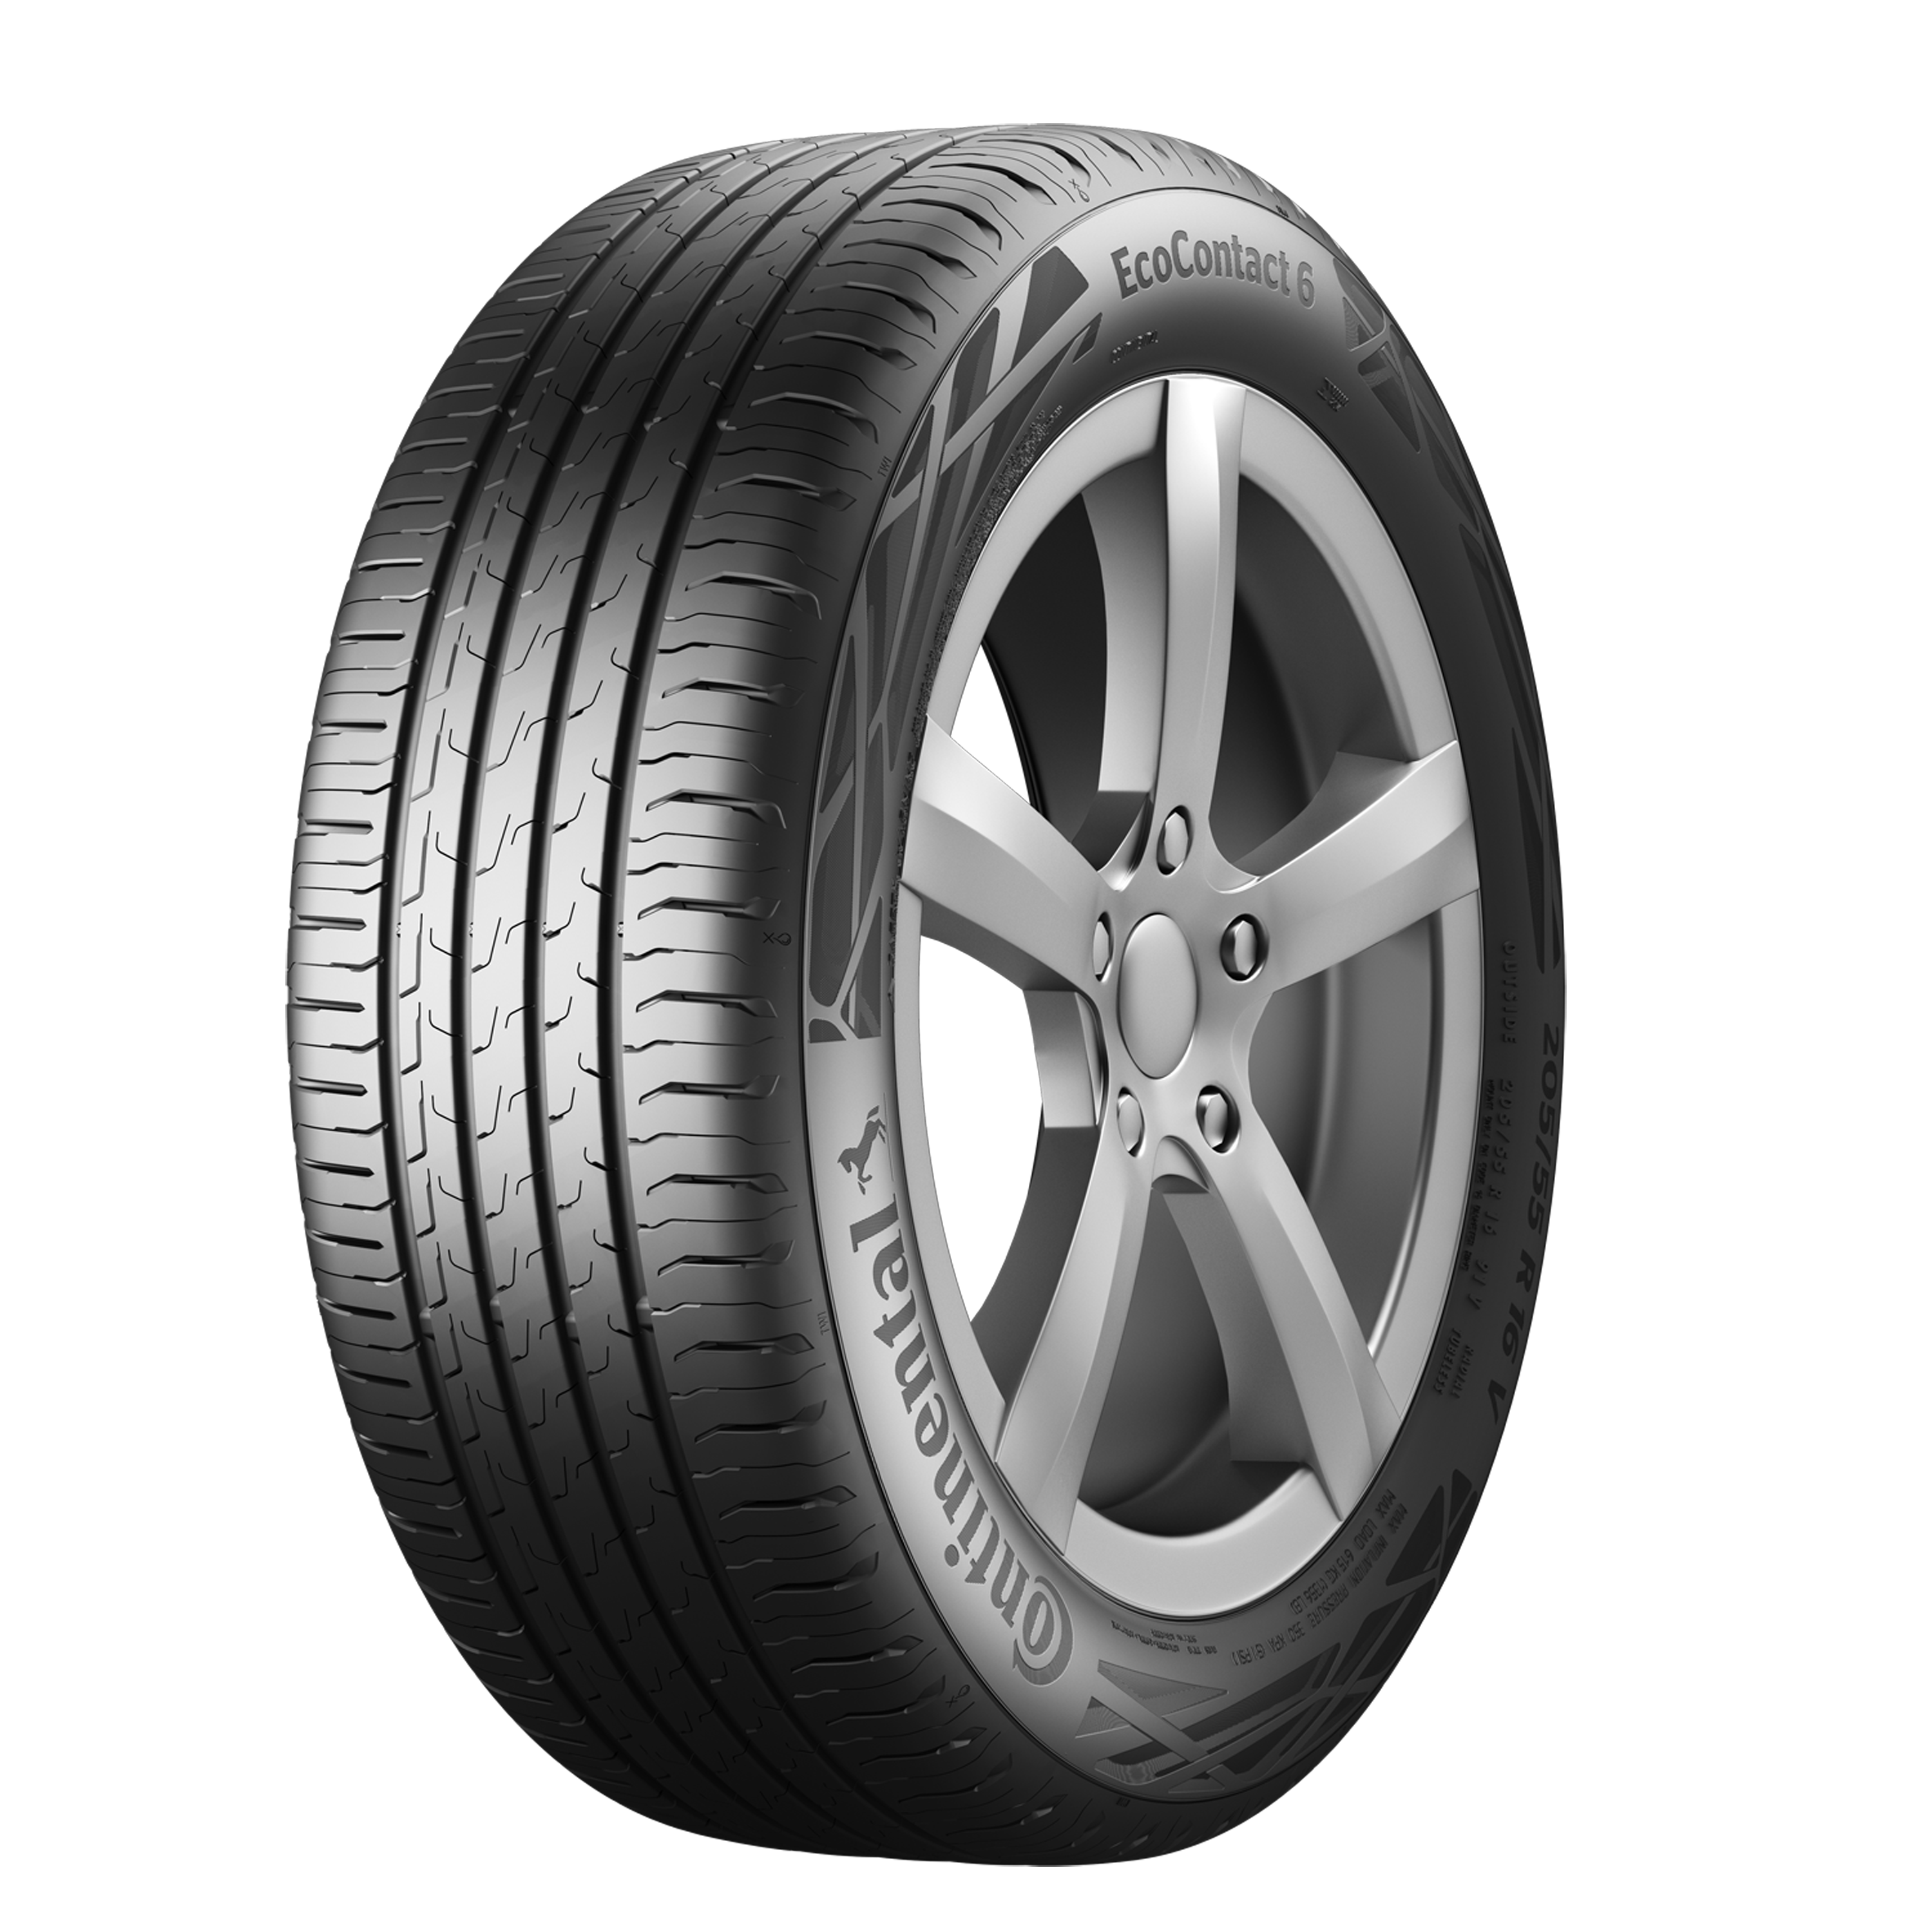 Summer car Continental Continental AG - tires from